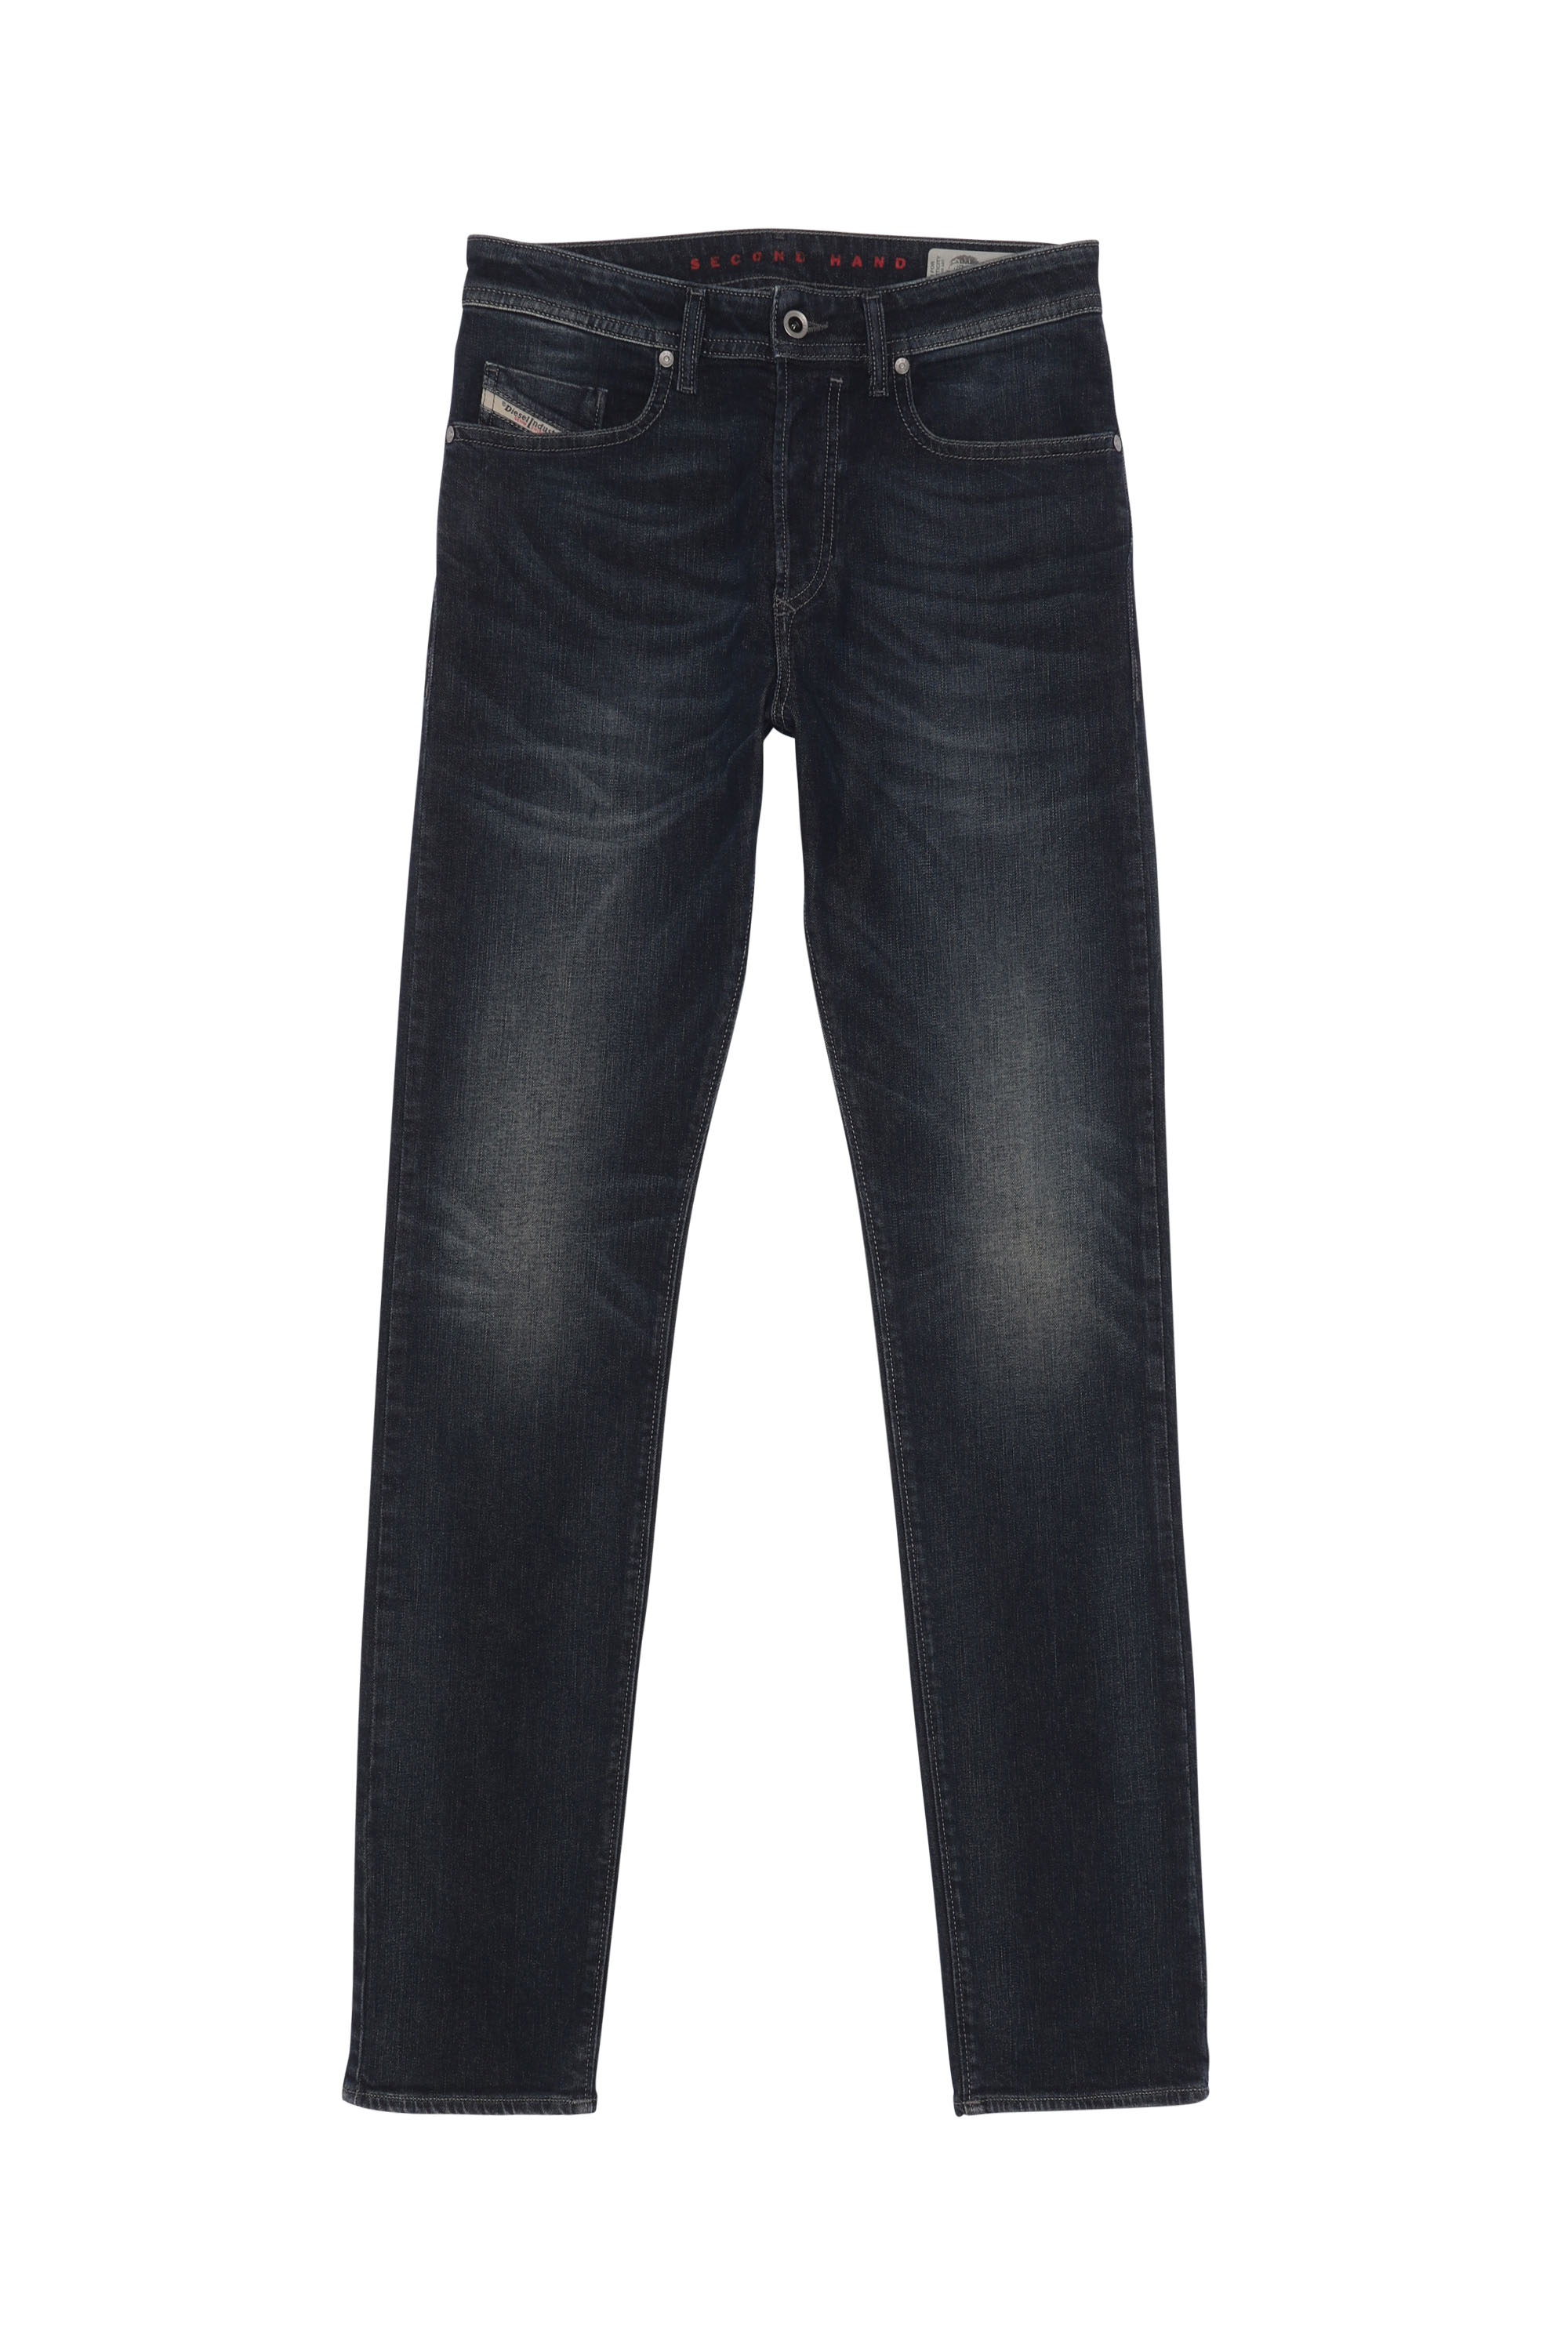 BUSTER, Blu Scuro - Jeans